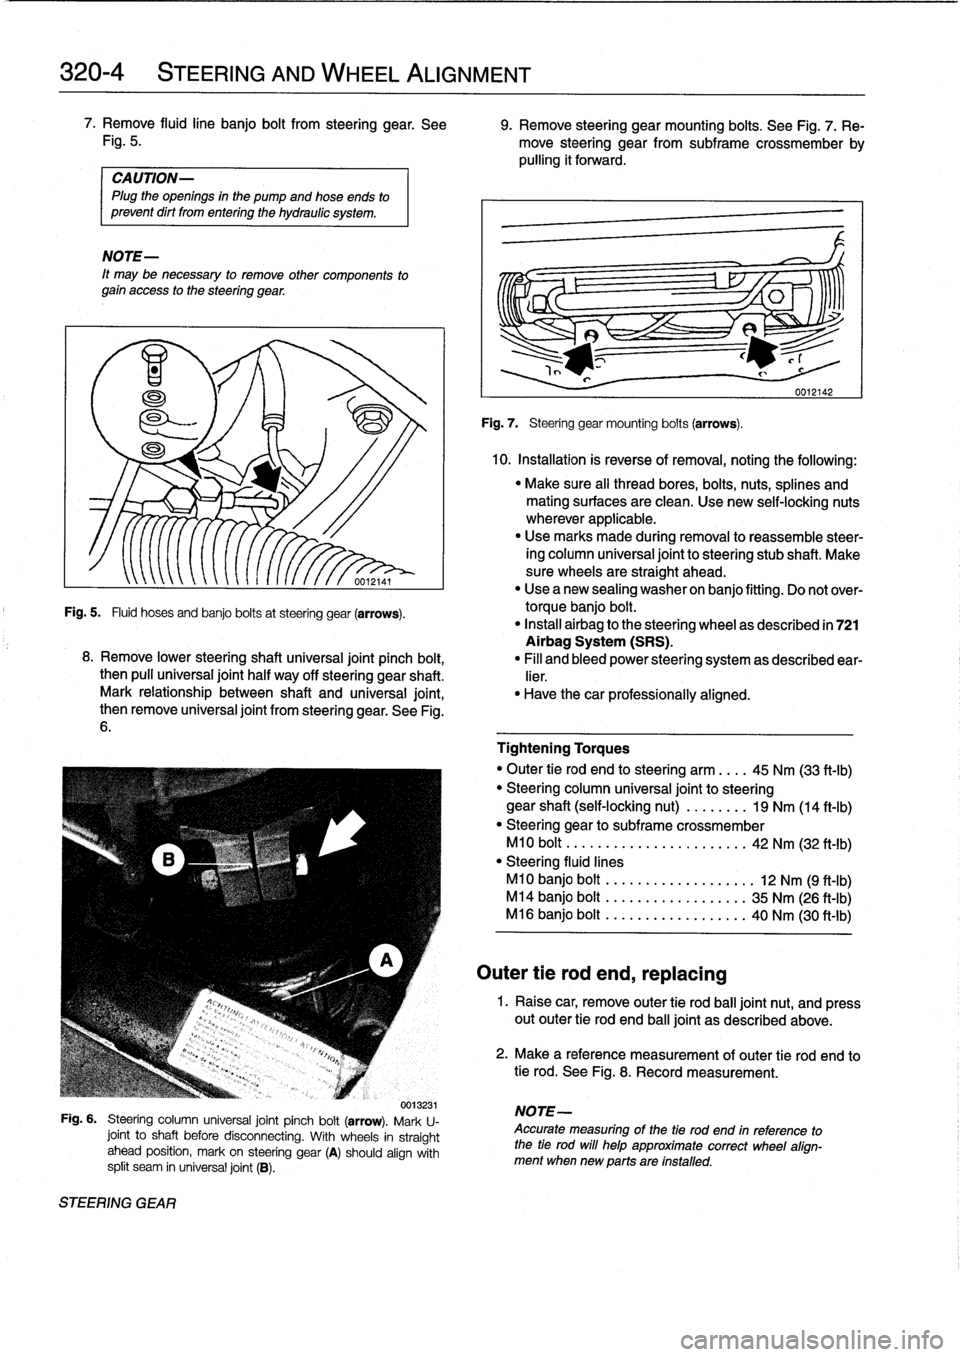 BMW M3 1998 E36 Workshop Manual 
320-
4

	

STEERING
AND
WHEEL
ALIGNMENT

7
.
Remove
fluidline
banjo
bolt
from
steering
gear
.
See

	

9
.
Remove
steering
gearmounting
bolts
.
See
Fig
.
7
.
Re
Fig
.
5
.

	

move
steering
gear
from
s